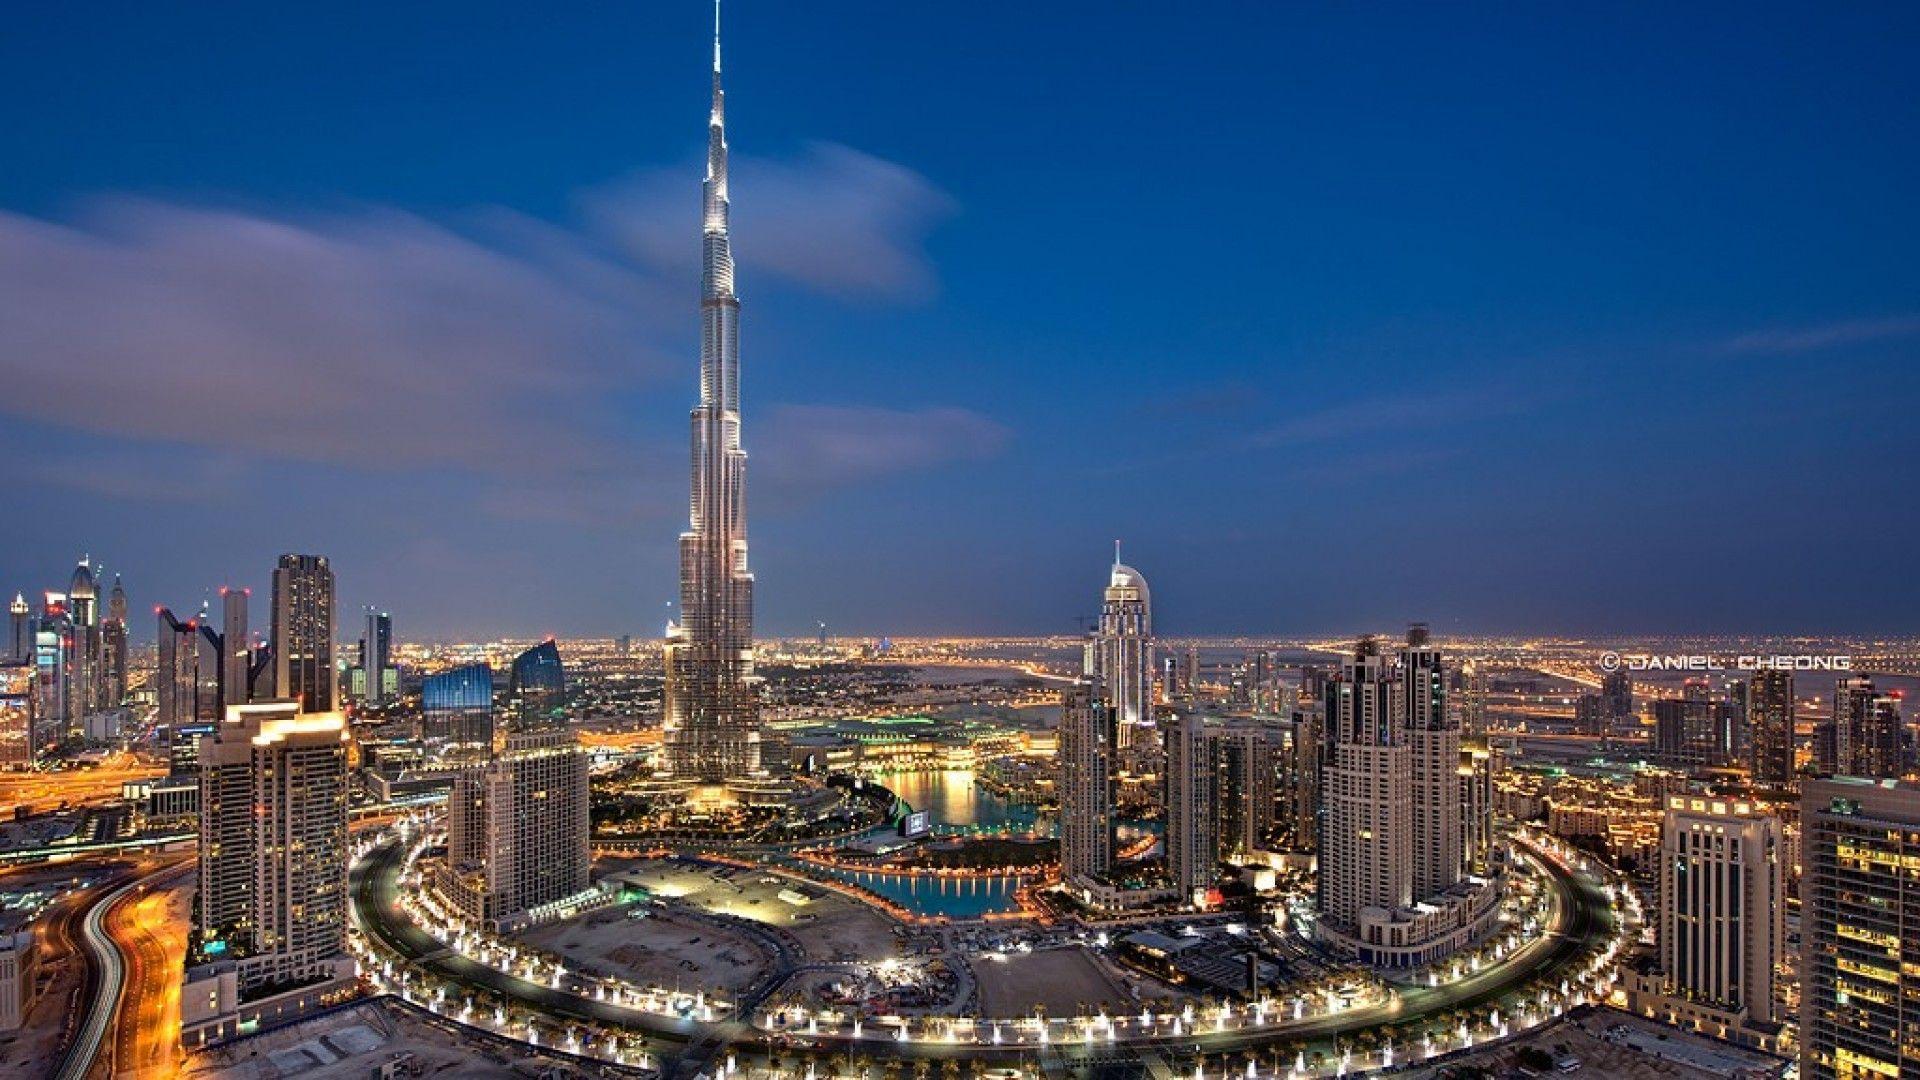 Burj Khalifa Facts and Information  The Tower Info